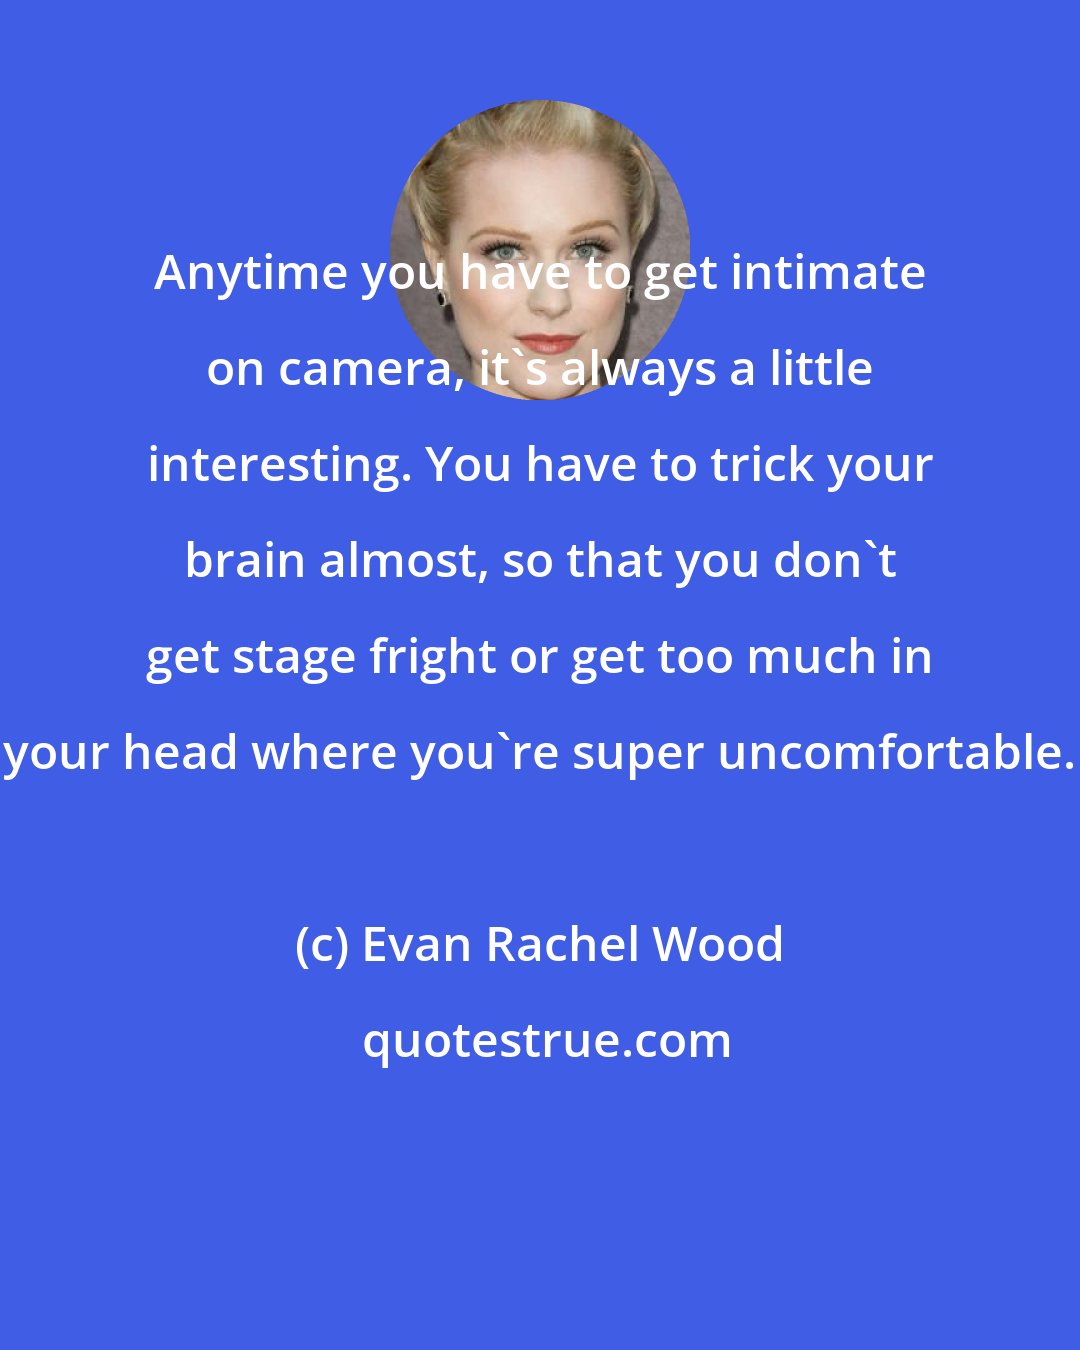 Evan Rachel Wood: Anytime you have to get intimate on camera, it's always a little interesting. You have to trick your brain almost, so that you don't get stage fright or get too much in your head where you're super uncomfortable.